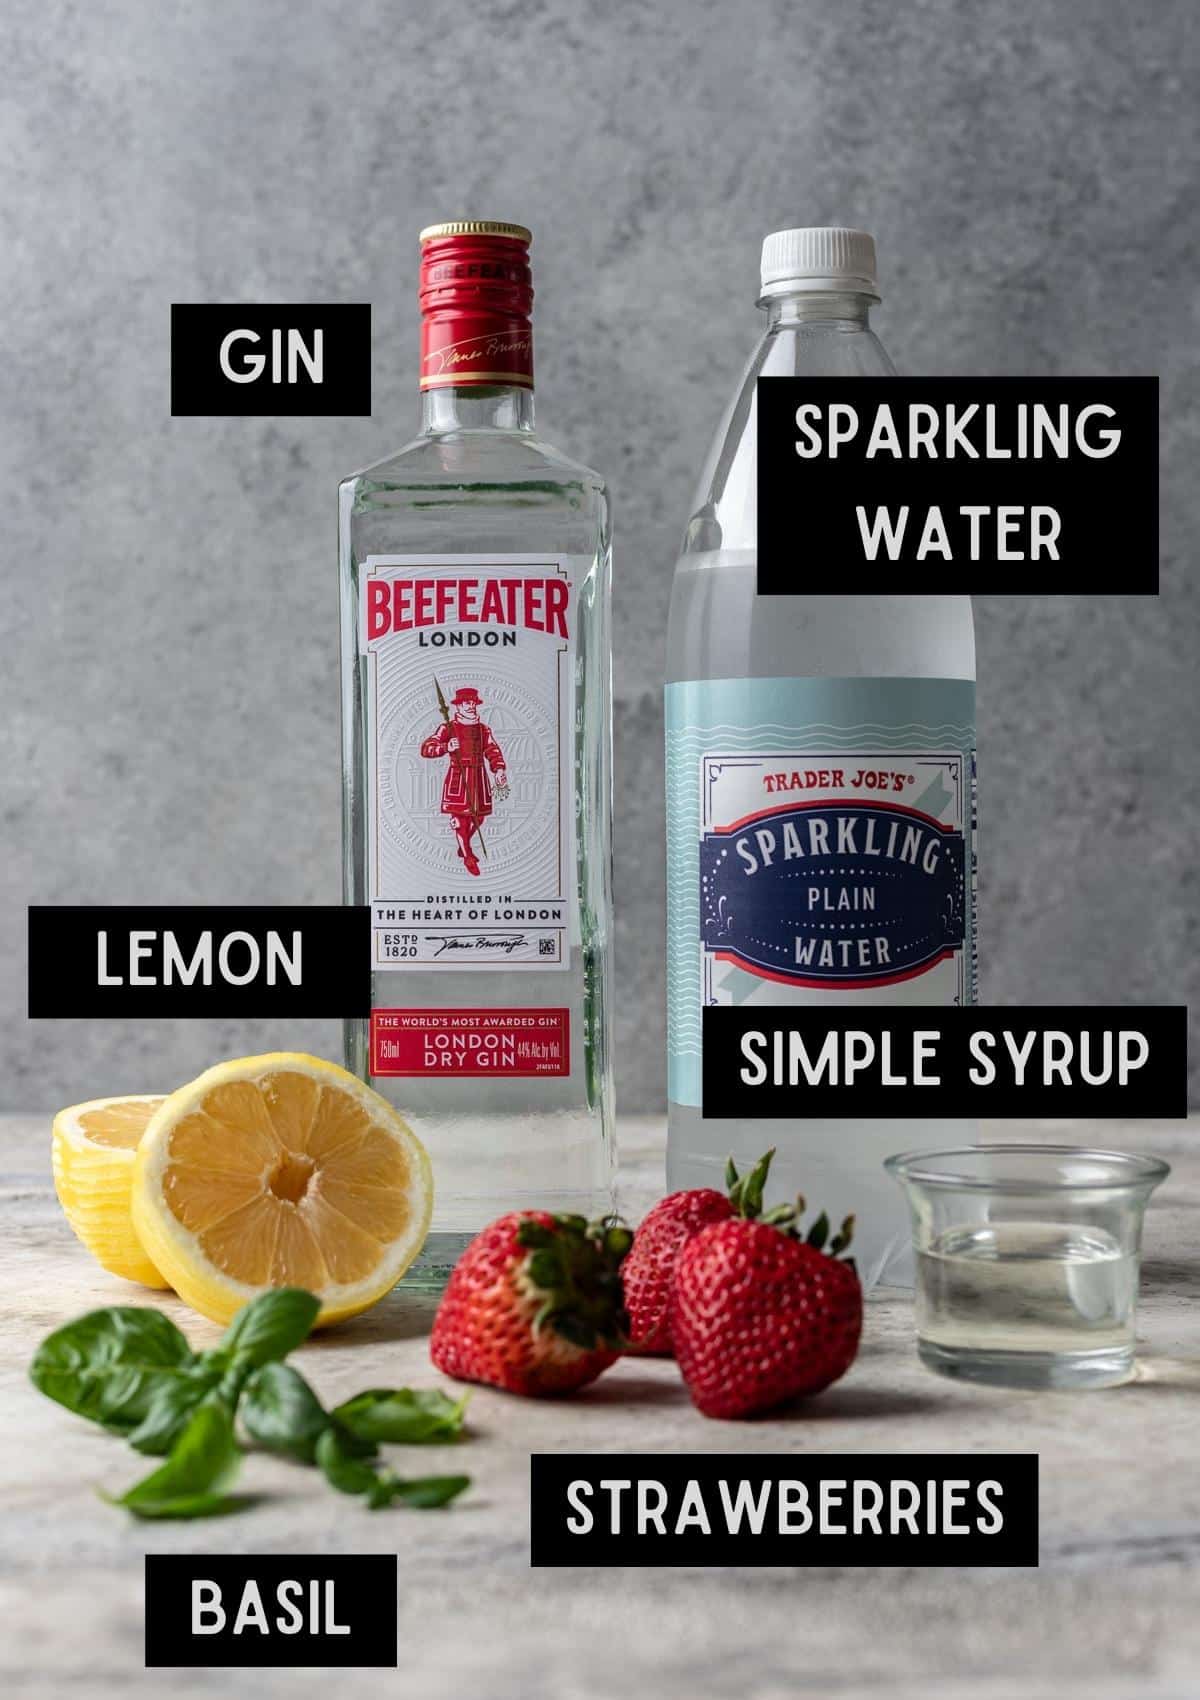 Labelled ingredients for strawberry basil gin smash (see recipe for details).